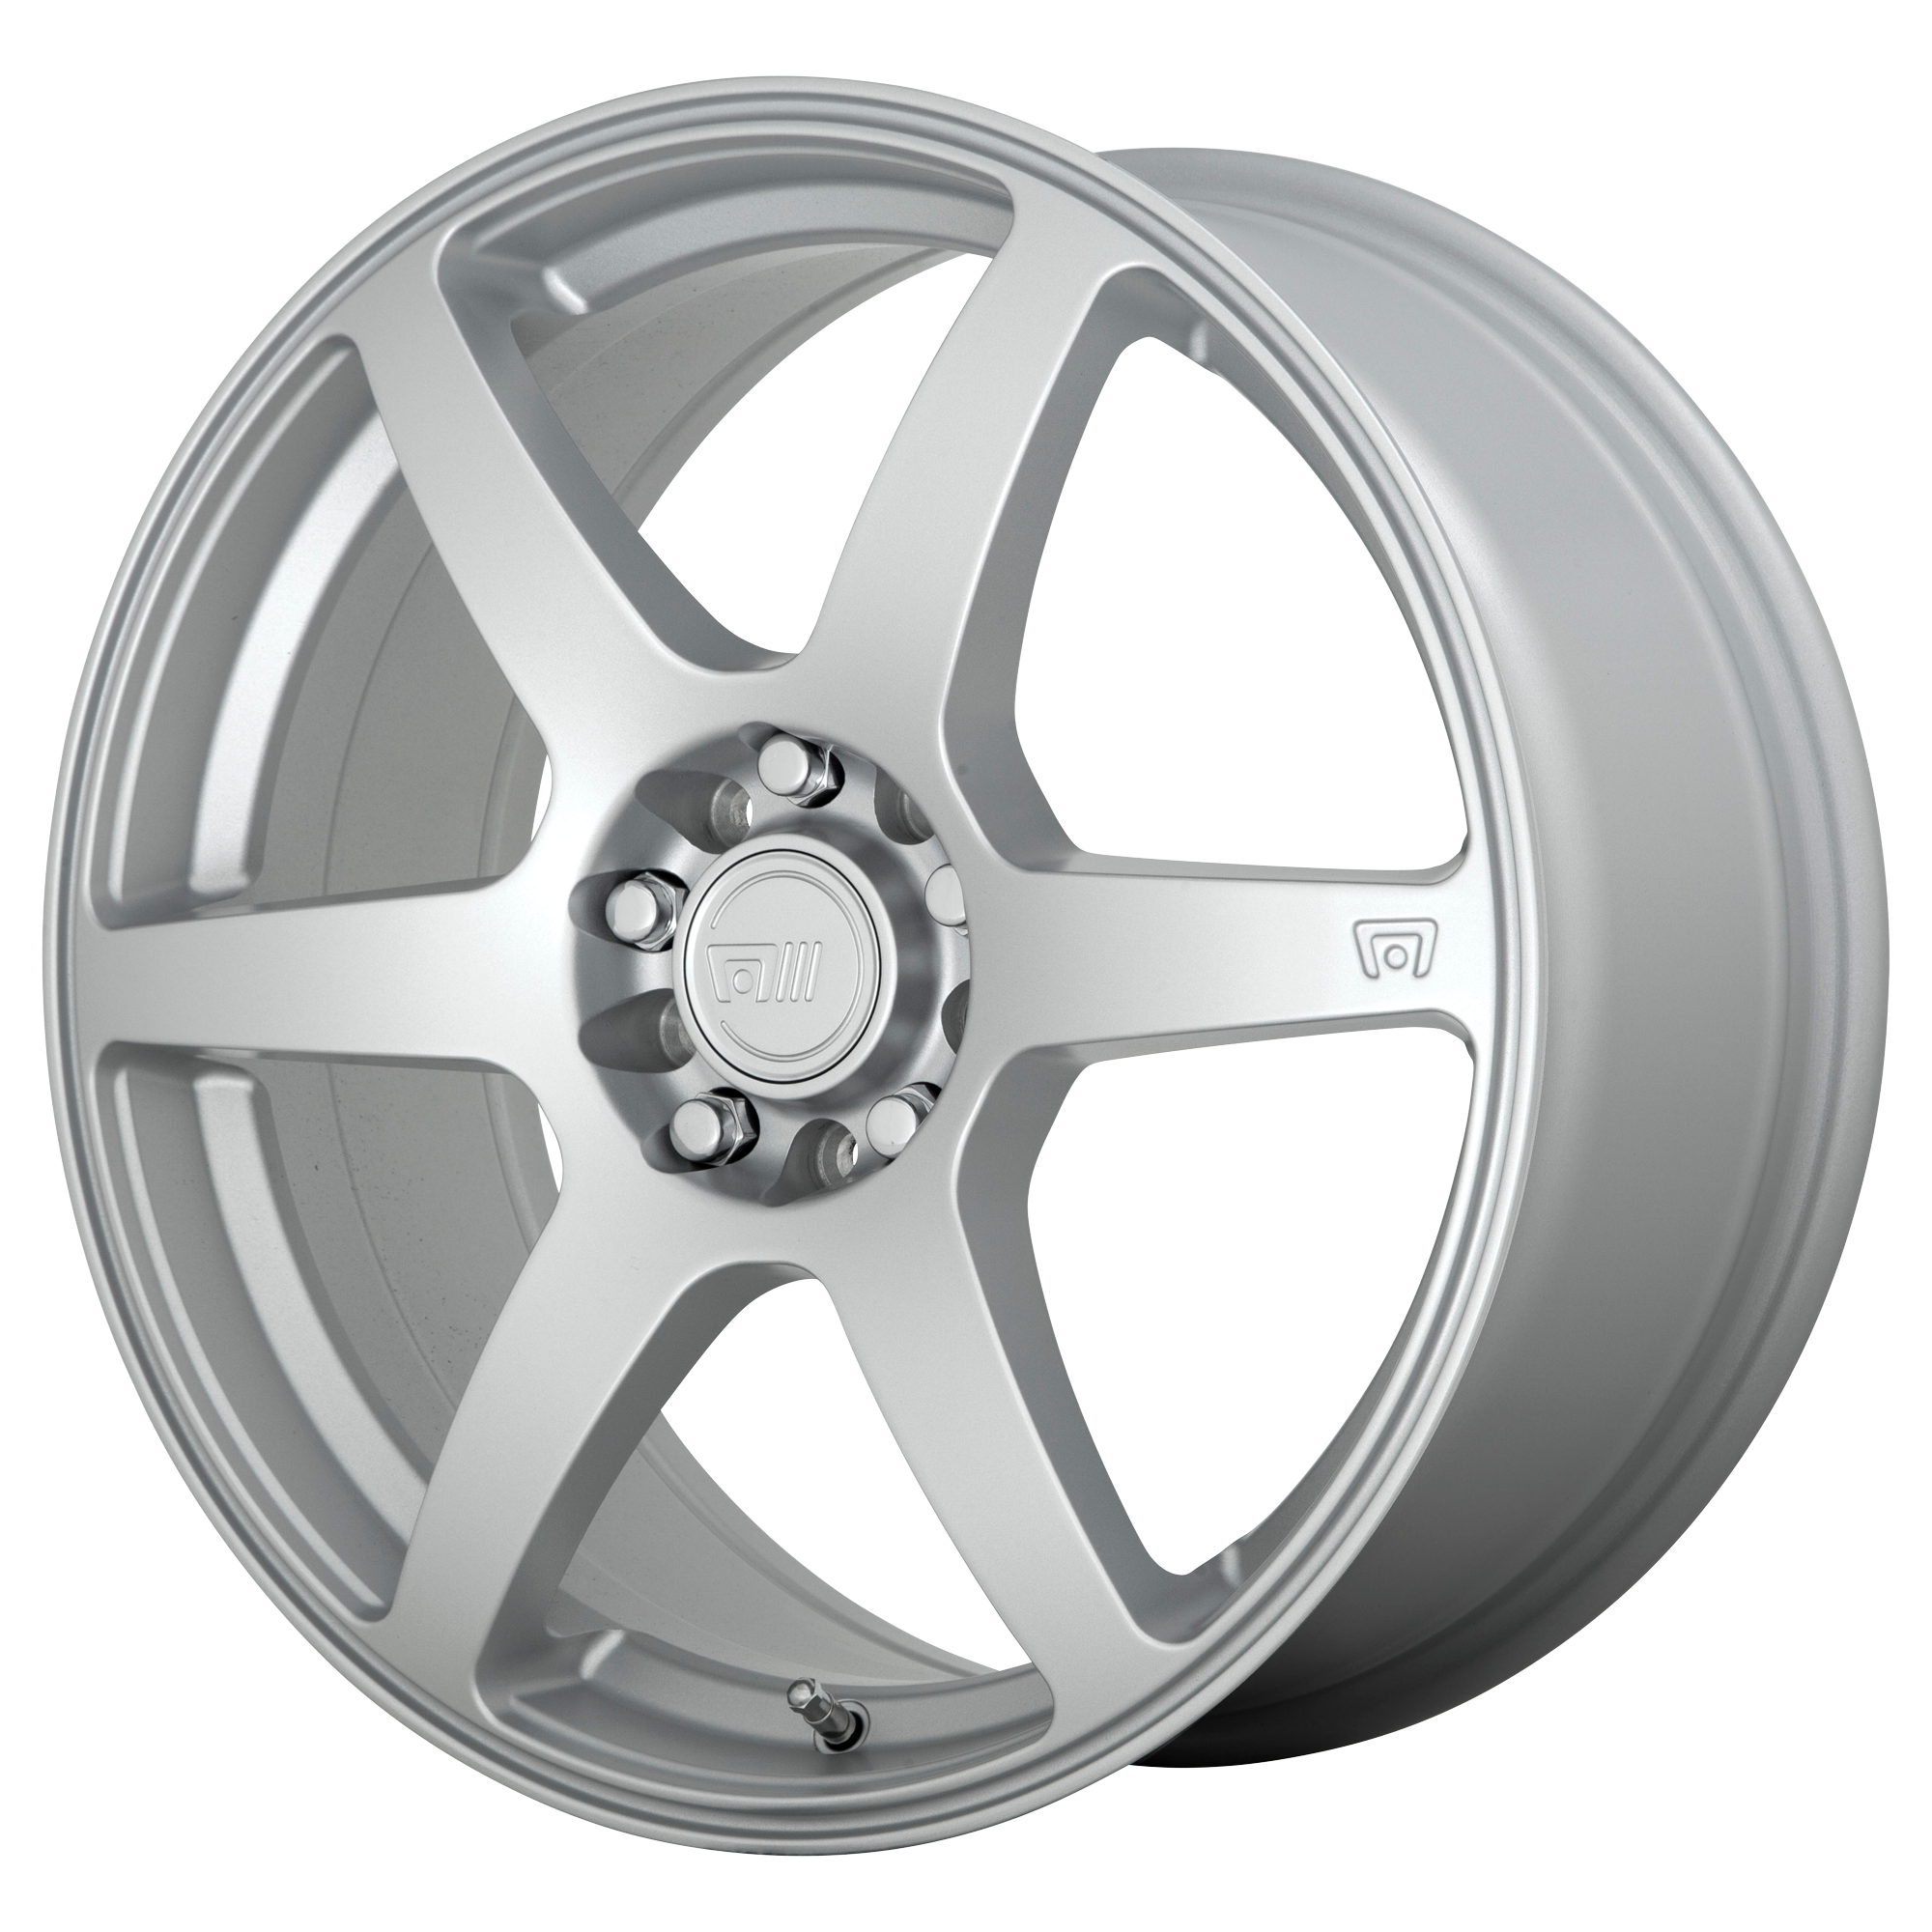 CS6 17x7 5x114.30/5x120.00 HYPER SILVER (40 mm) - Tires and Engine Performance